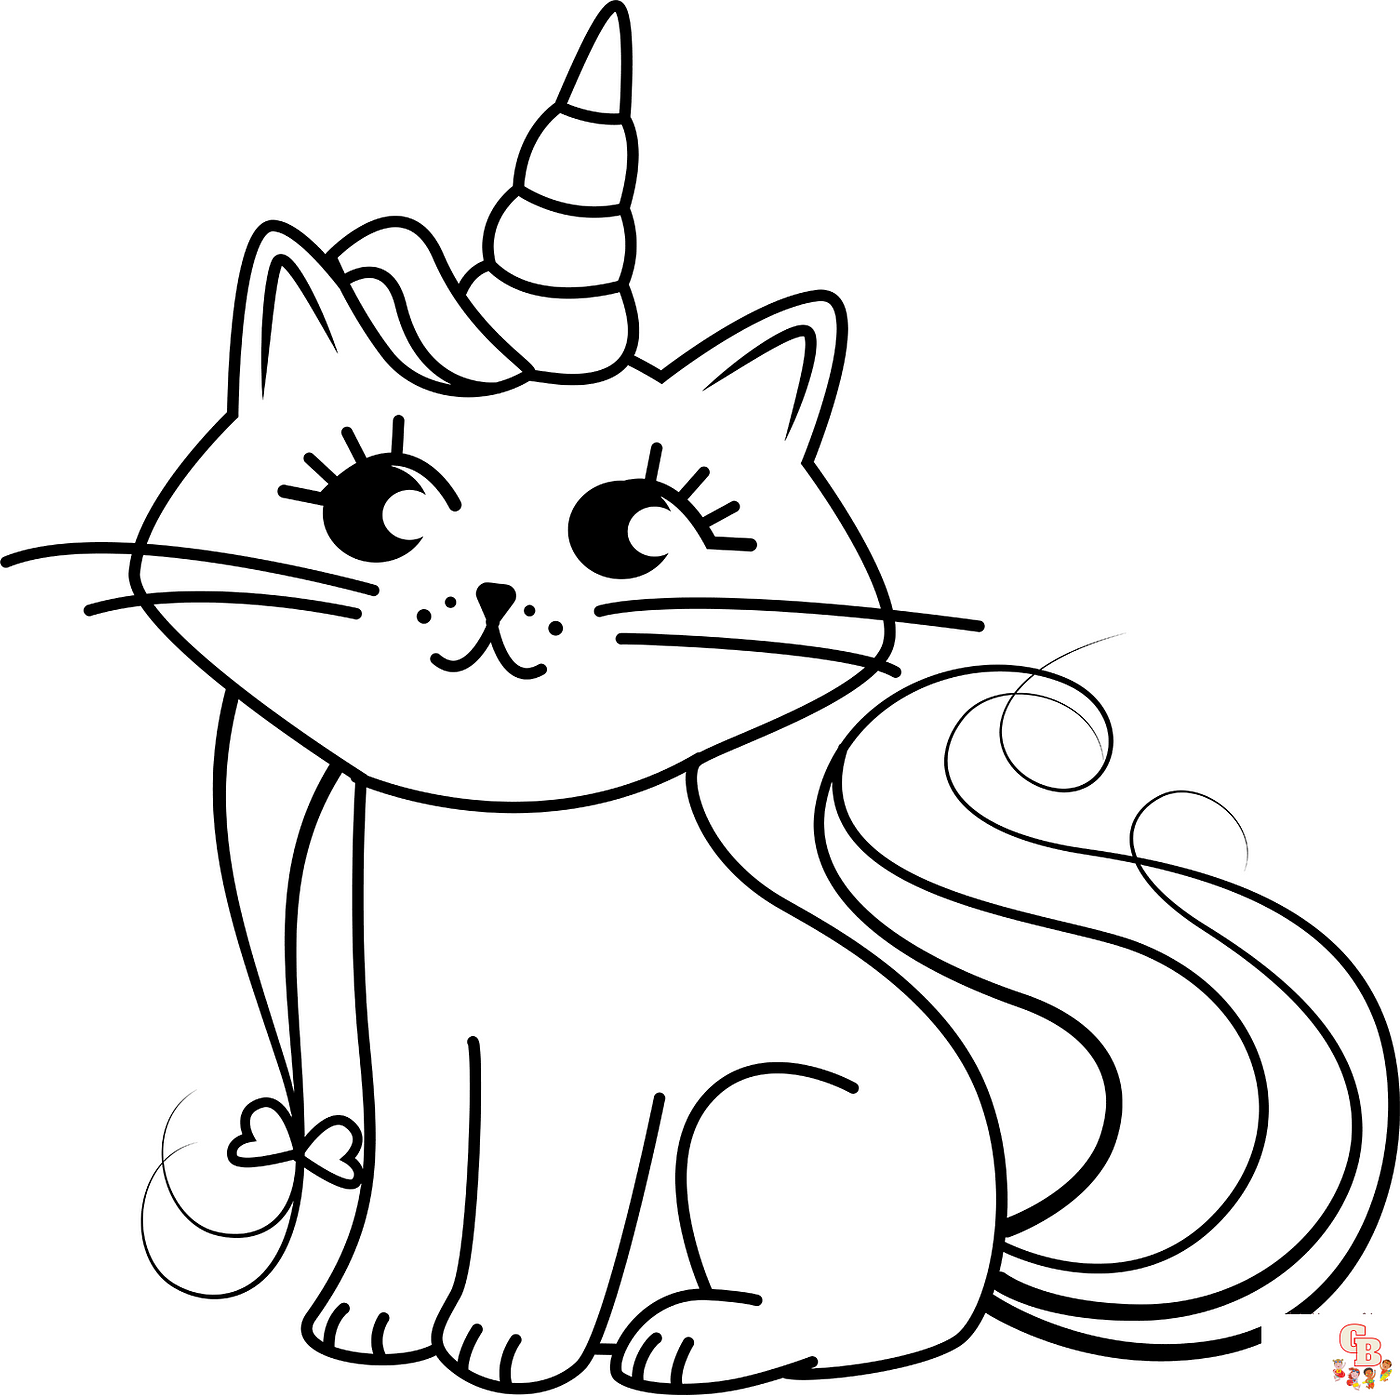 Enjoy Fun and Free Simon's Cat Coloring Pages